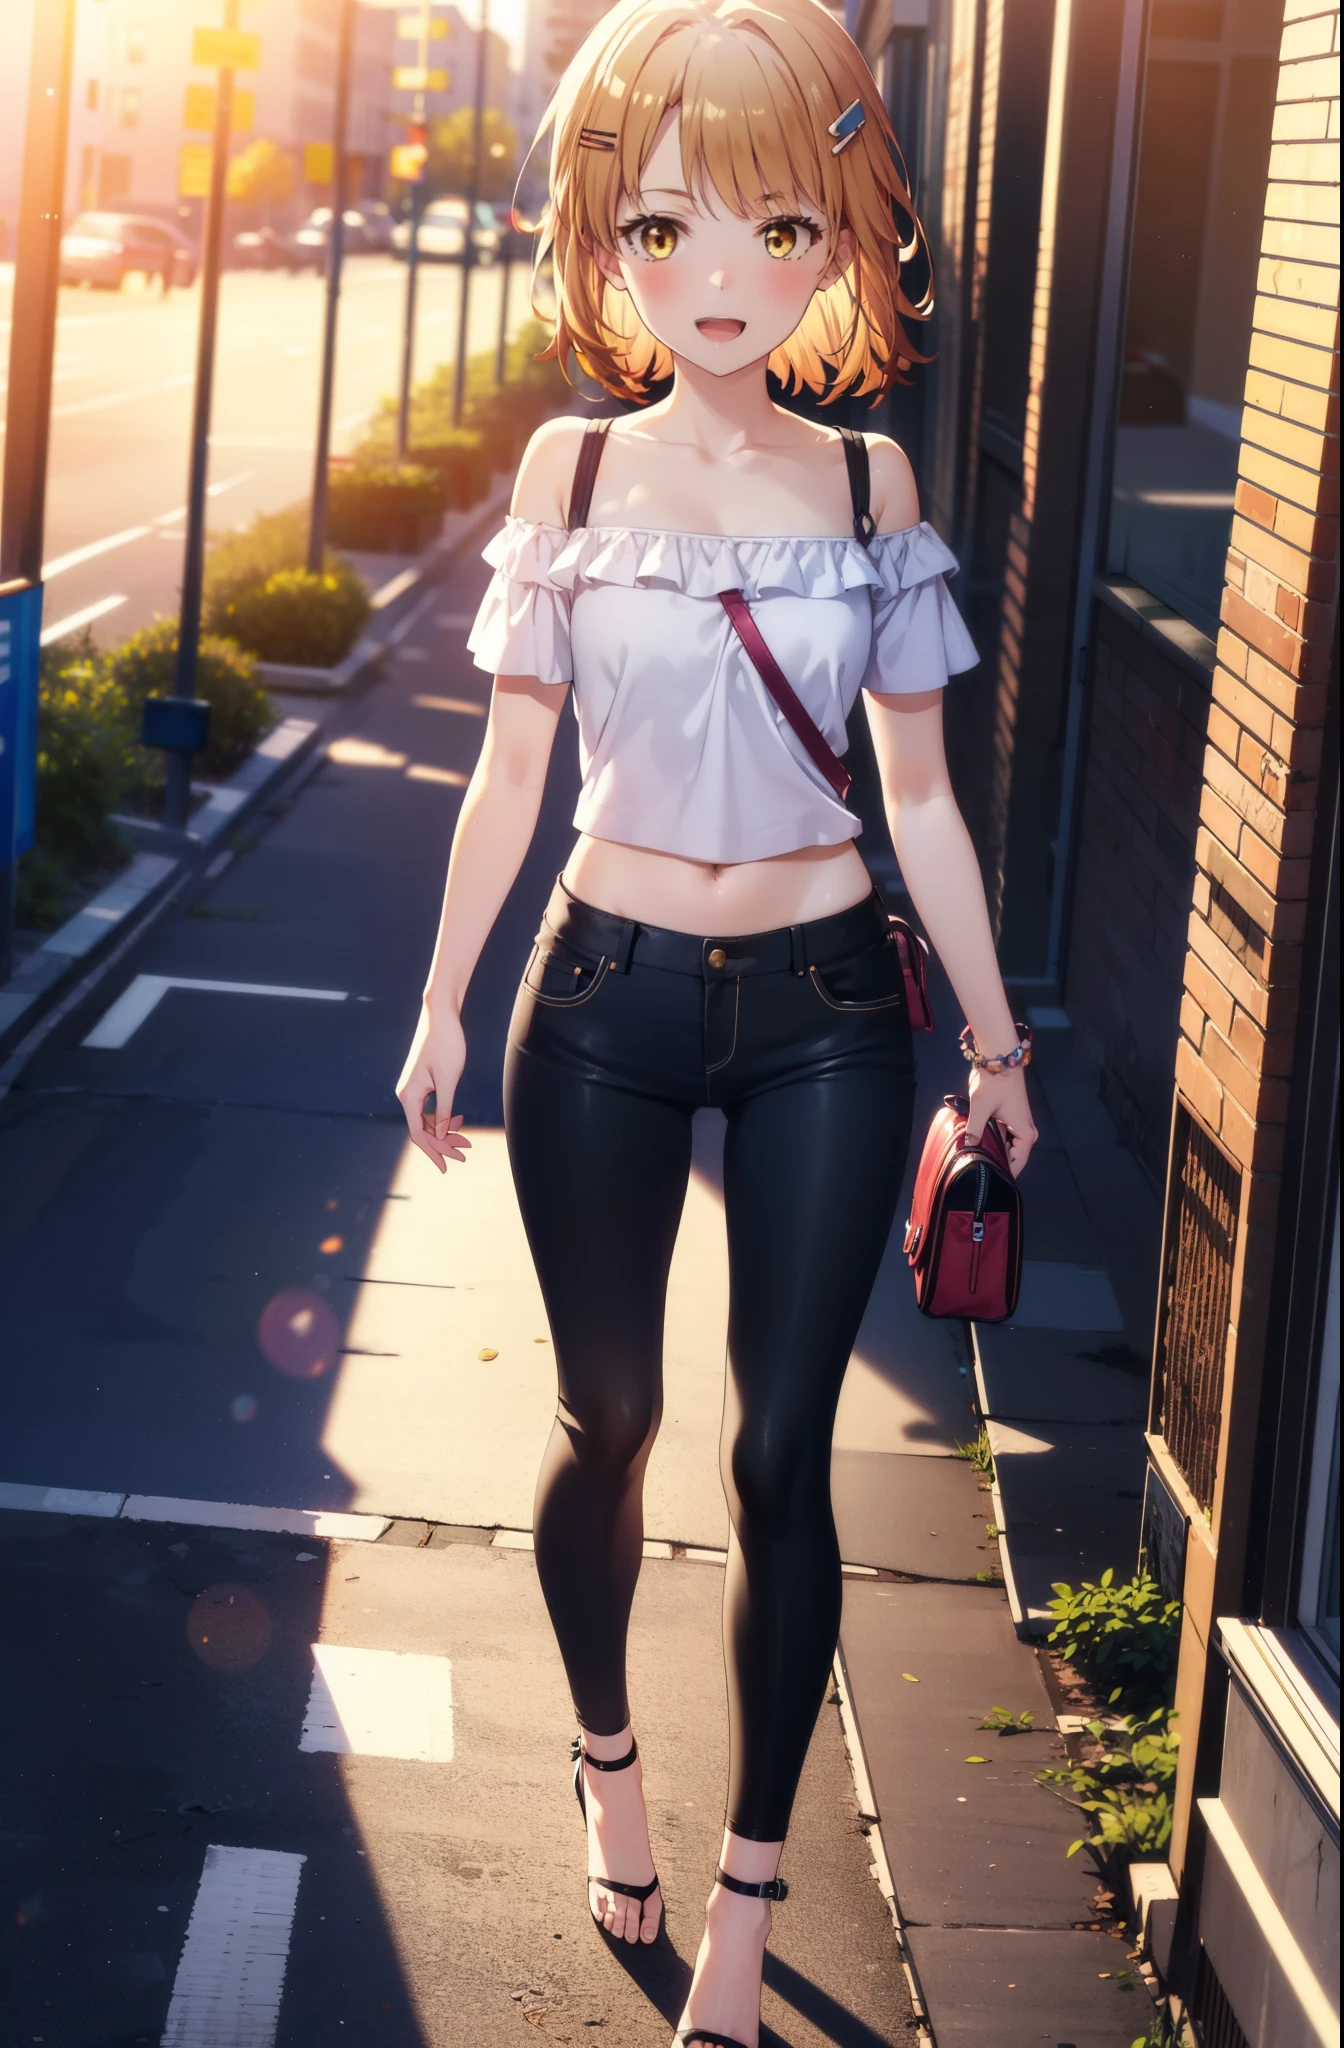 irohaisshiki, iroha isshiki, short hair, Brown Hair, (Brown eyes:1.5),happy smile, smile, Open your mouth,ponytail,short braided hair band,Cord off-shoulder top,Short sleeve,skinny pants,Stiletto heels,Sunset,evening,The sun is setting,Walking,whole bodyがイラストに入るように,Looking down from above,Holding a Chanel bag in her right hand,
break outdoors,In town,Building district,
break looking at viewer, whole body,
break (masterpiece:1.2), highest quality, High resolution, unity 8k wallpaper, (shape:0.8), (Beautiful details:1.6), Highly detailed face, Perfect lighting, Extremely detailed CG, (Perfect hands, Perfect Anatomy),